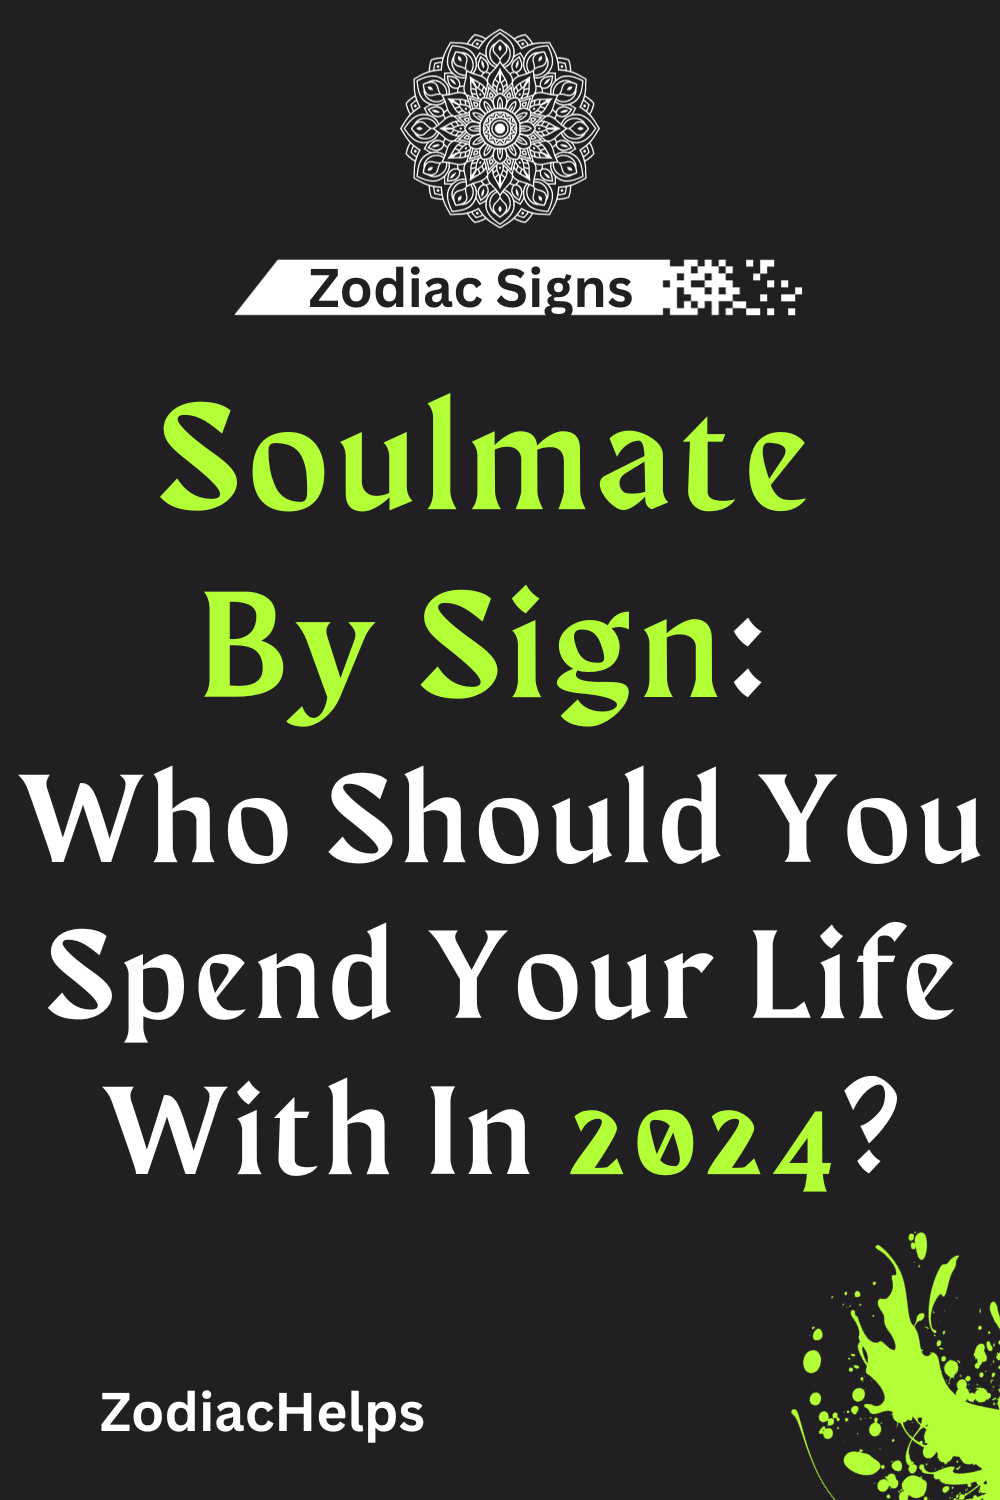 Soulmate By Sign: Who Should You Spend Your Life With In 2024?